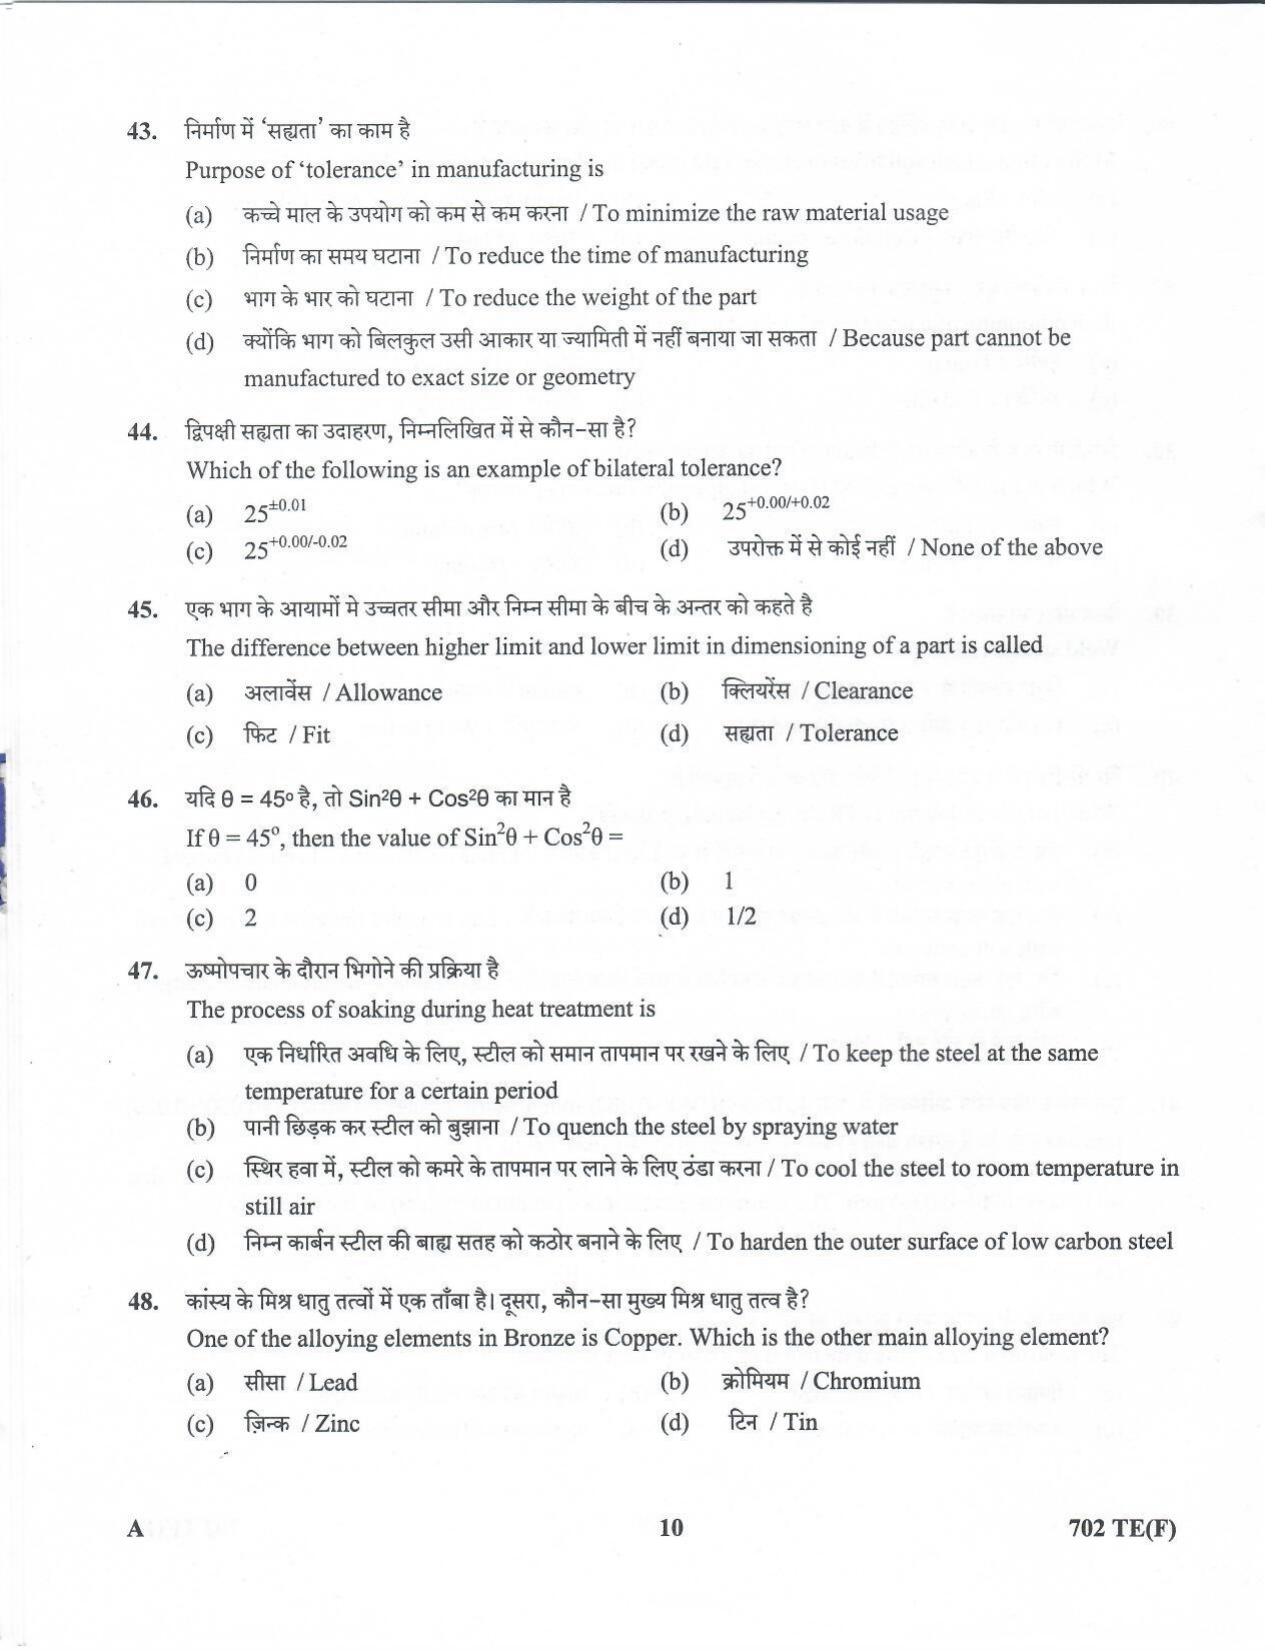 LPSC Technician ‘B’ (Fitter) 2020 Question Paper - Page 9